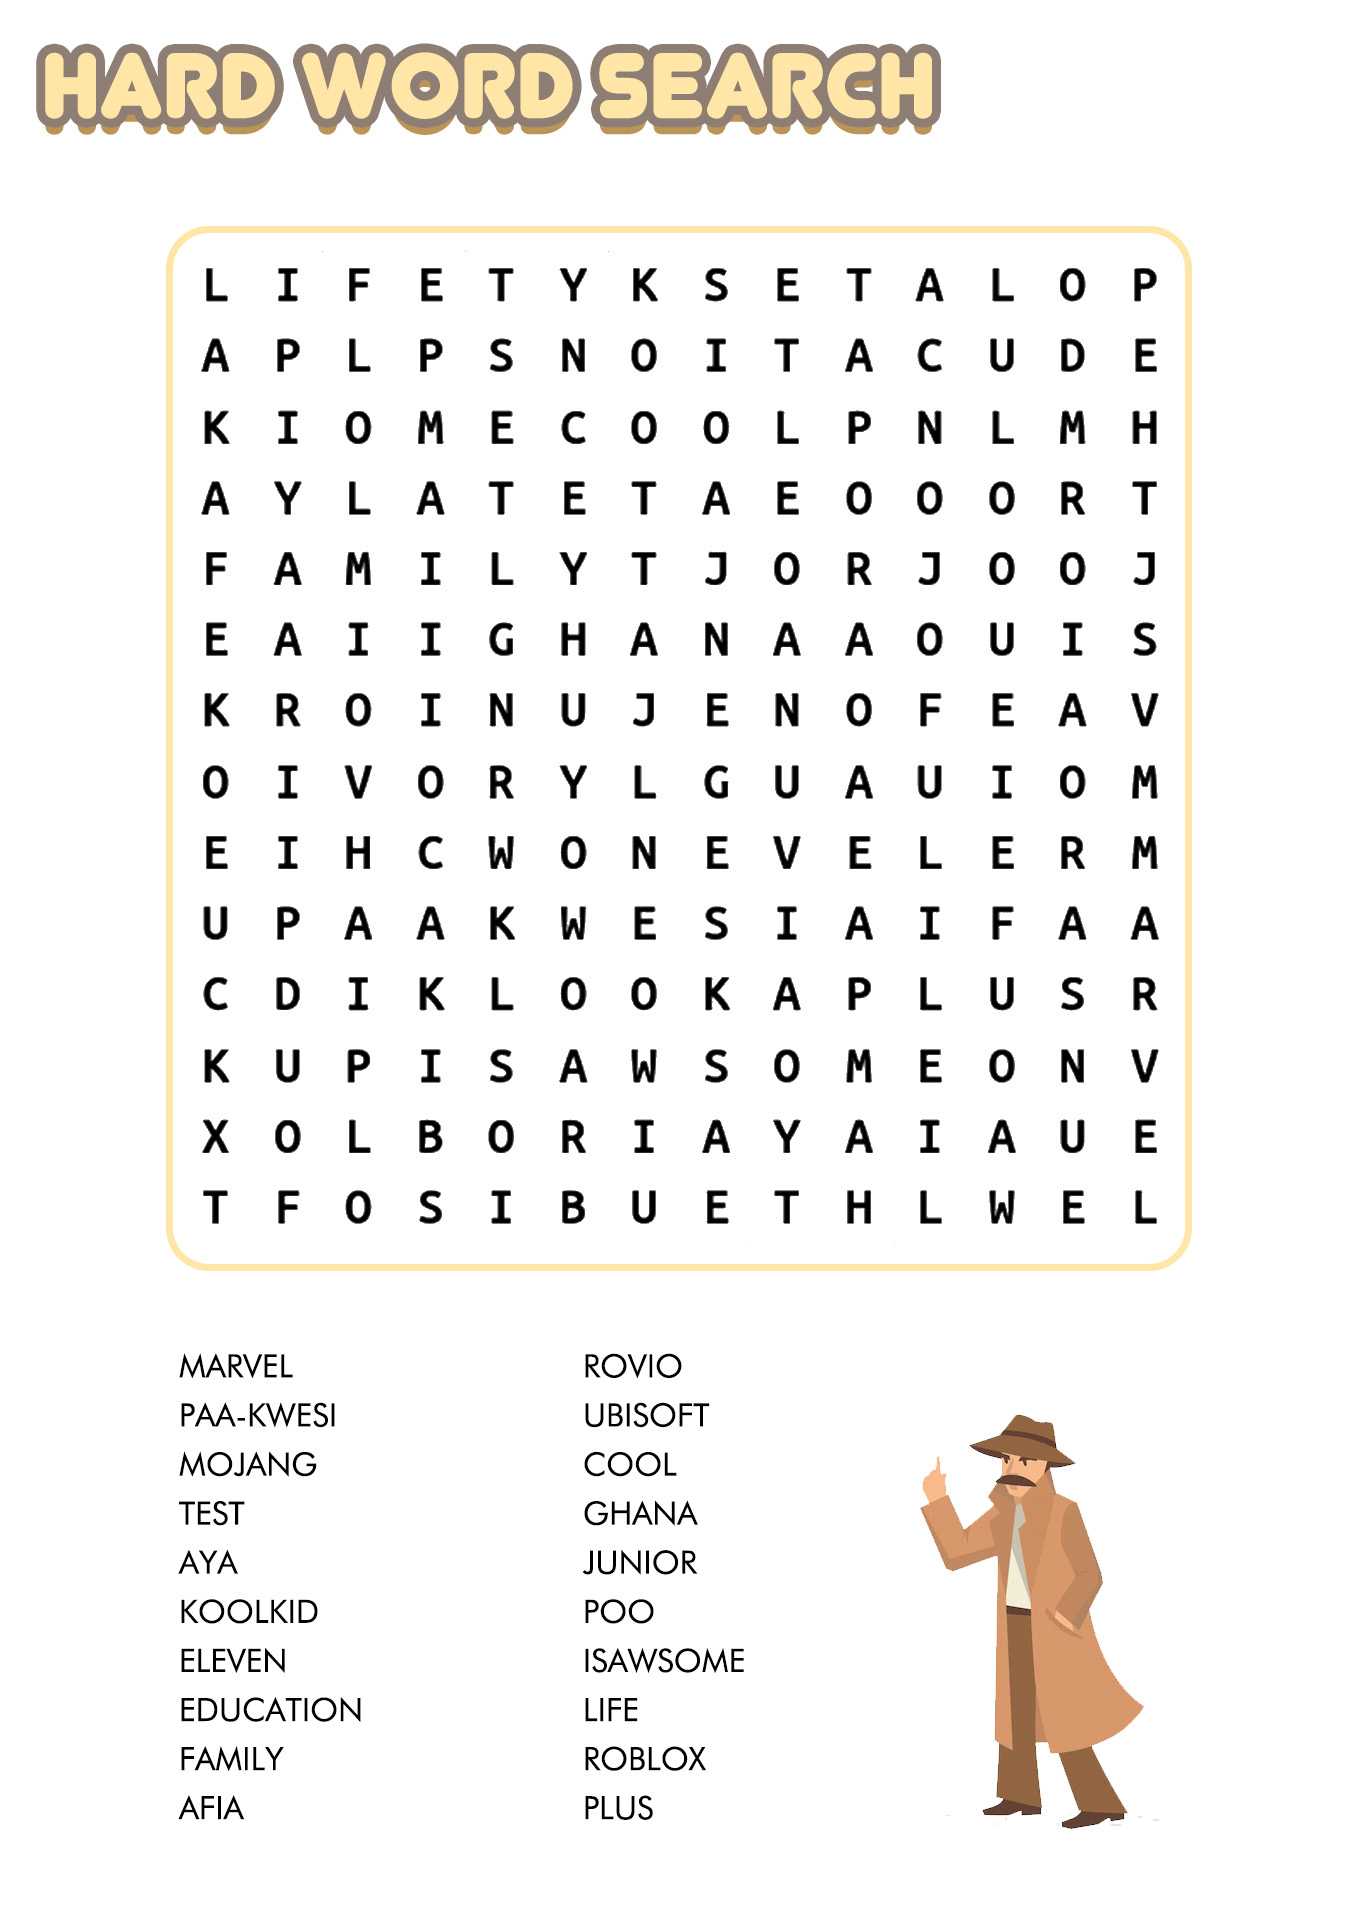 10 Best Images ofWord Search Puzzles Worksheets Difficult